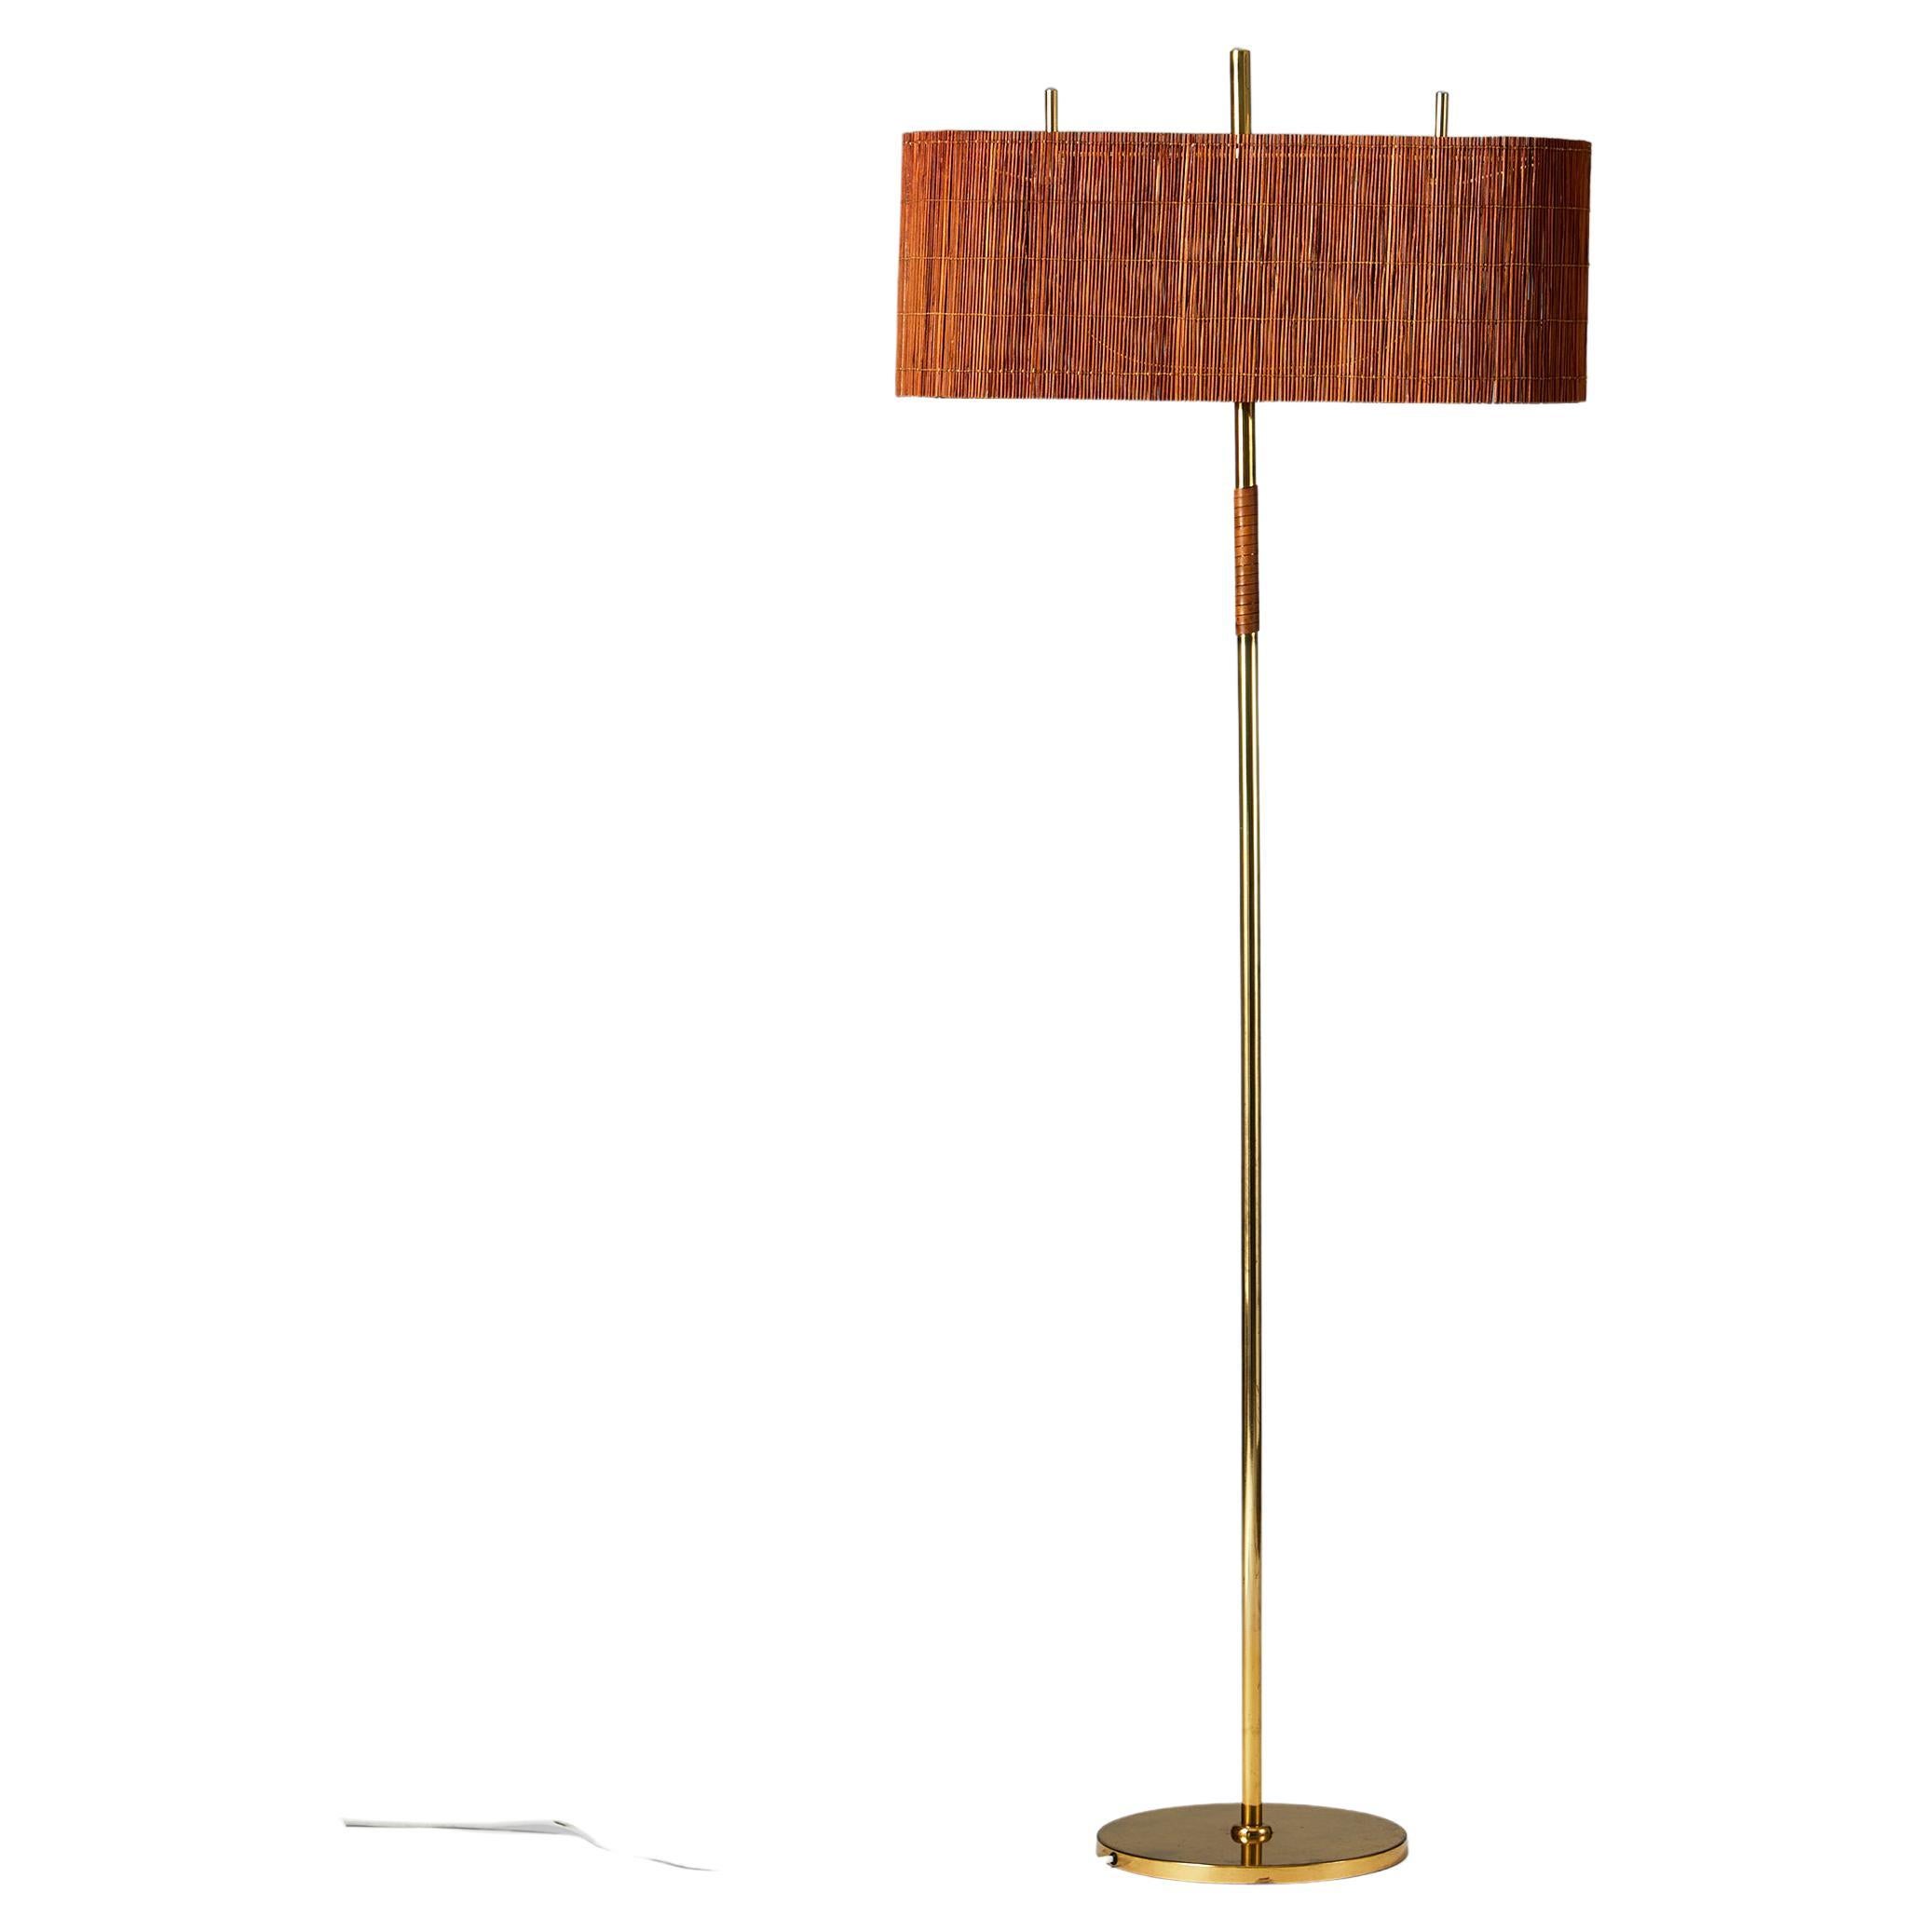 Floor Lamp Model 9621 Designed by Paavo Tynell for Taito Oy, Finland, 1940’s